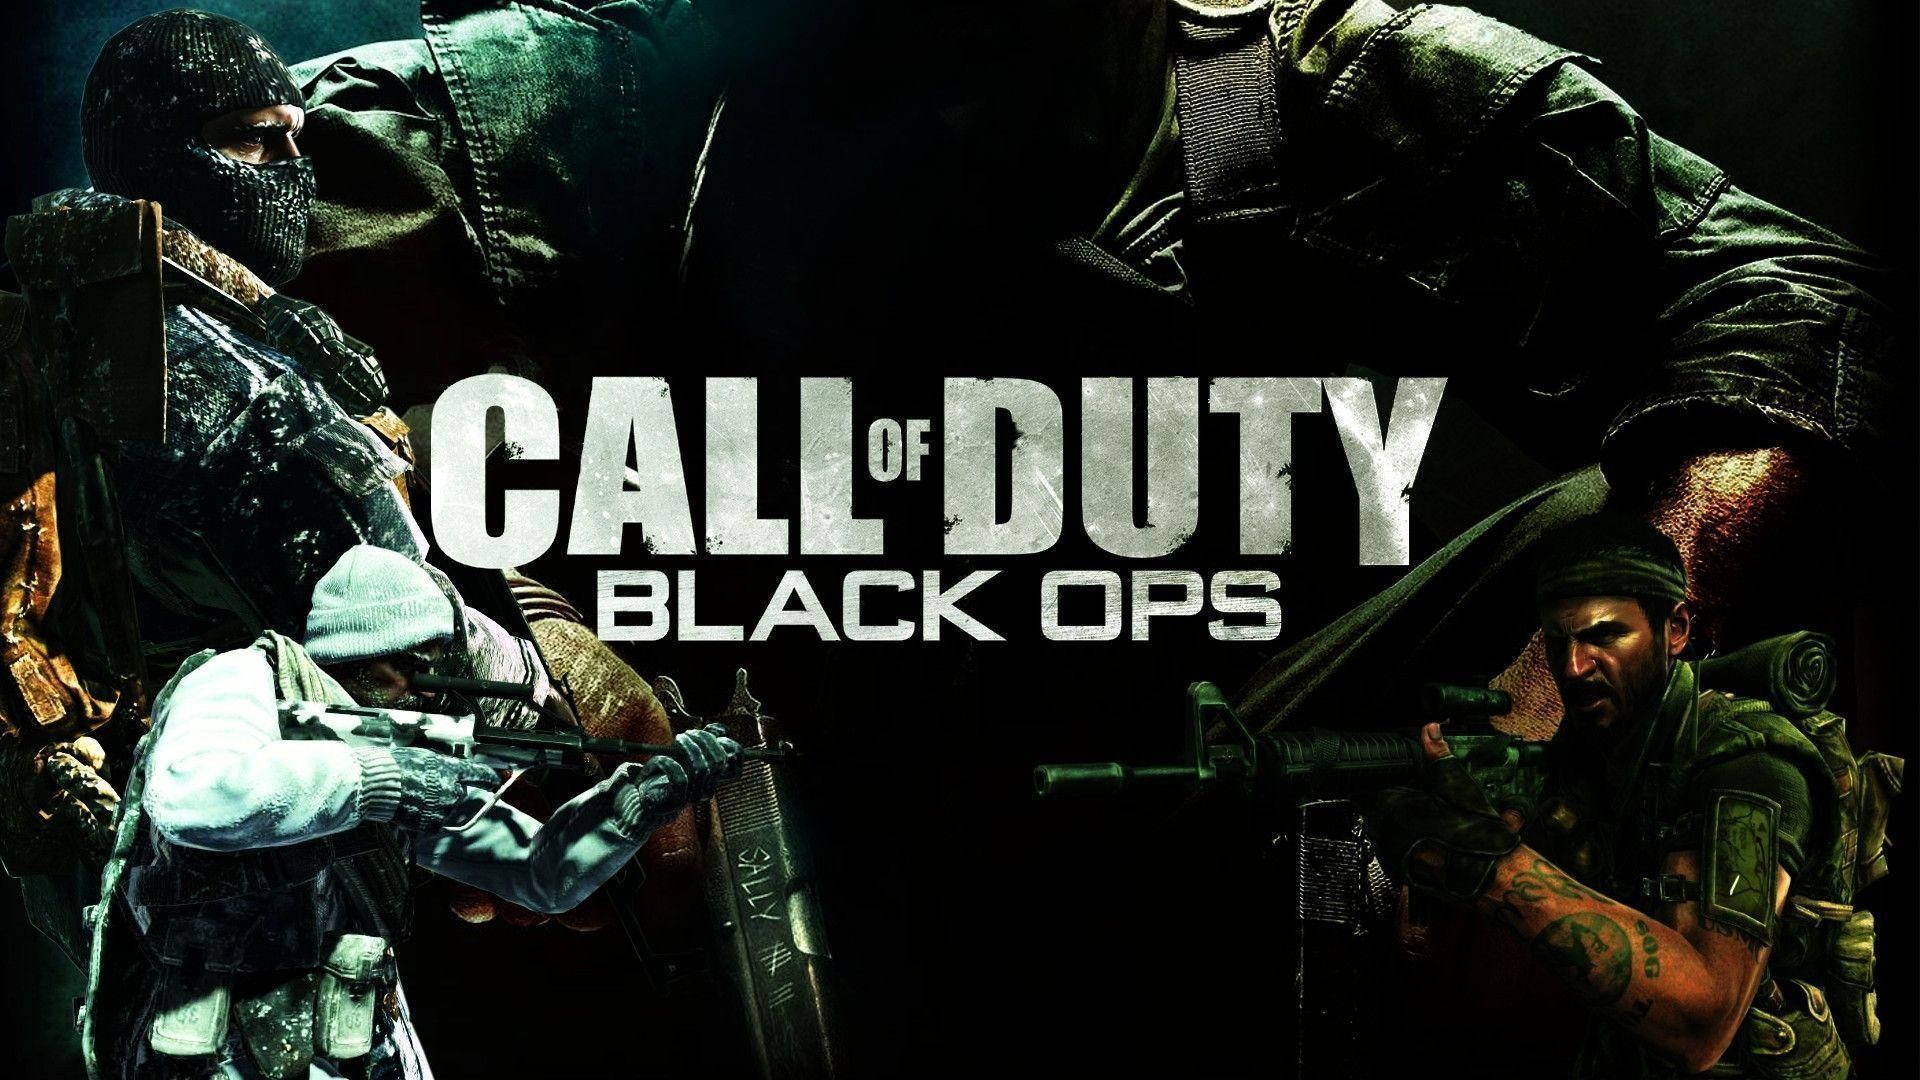 1920x1080 call of duty black ops wallpapers - Wishes Lol